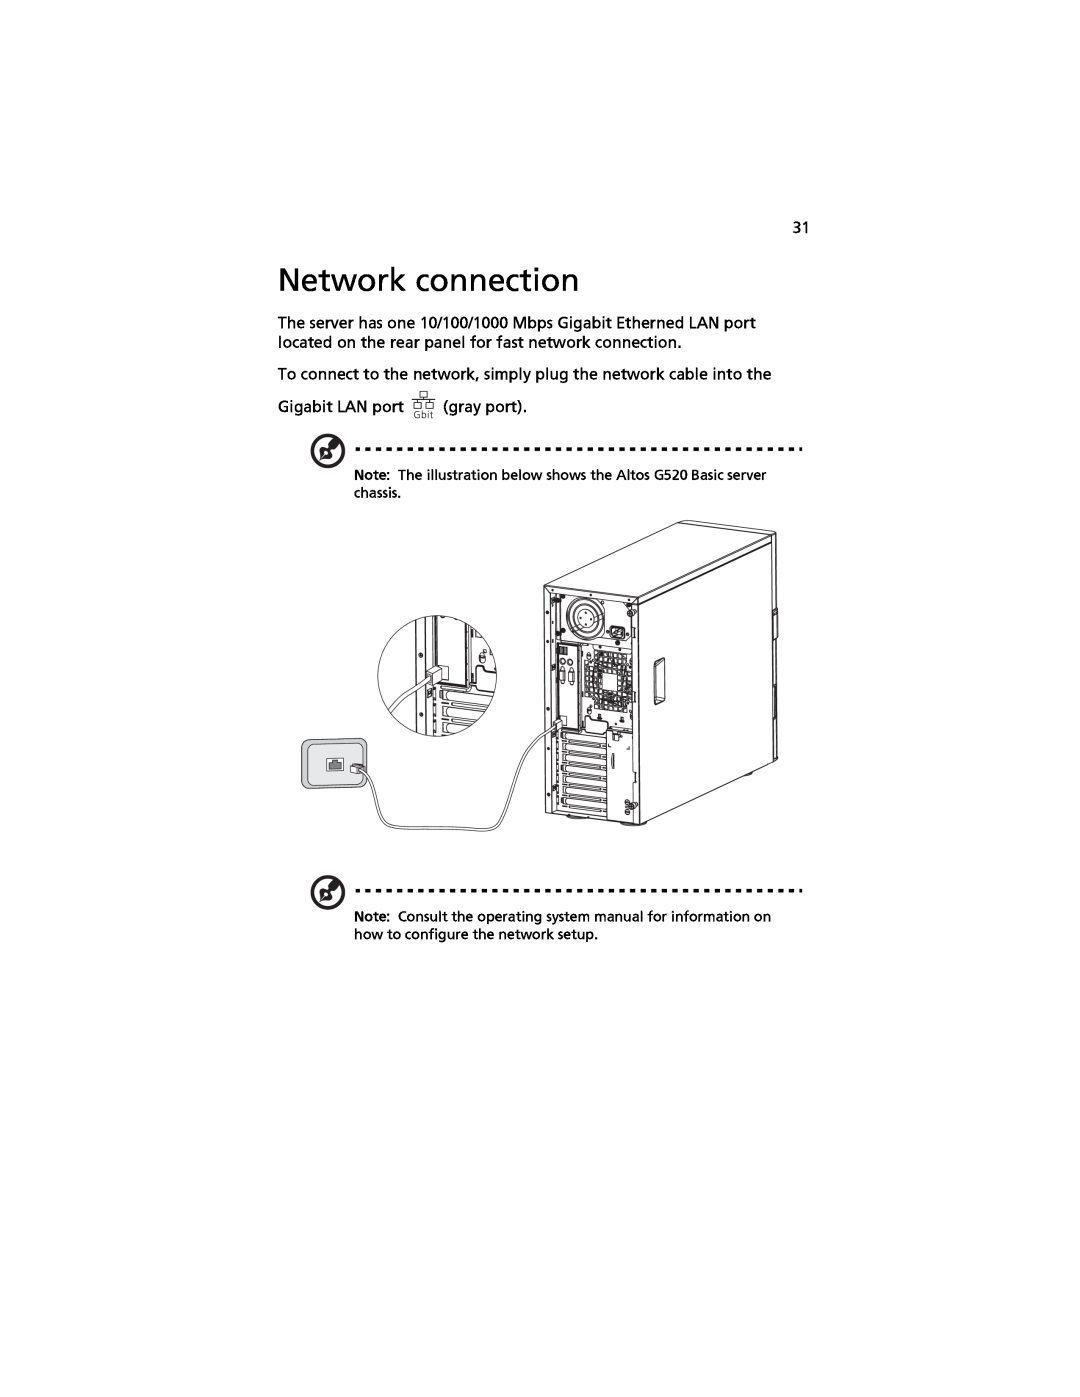 Acer G520 series manual Network connection, To connect to the network, simply plug the network cable into the 